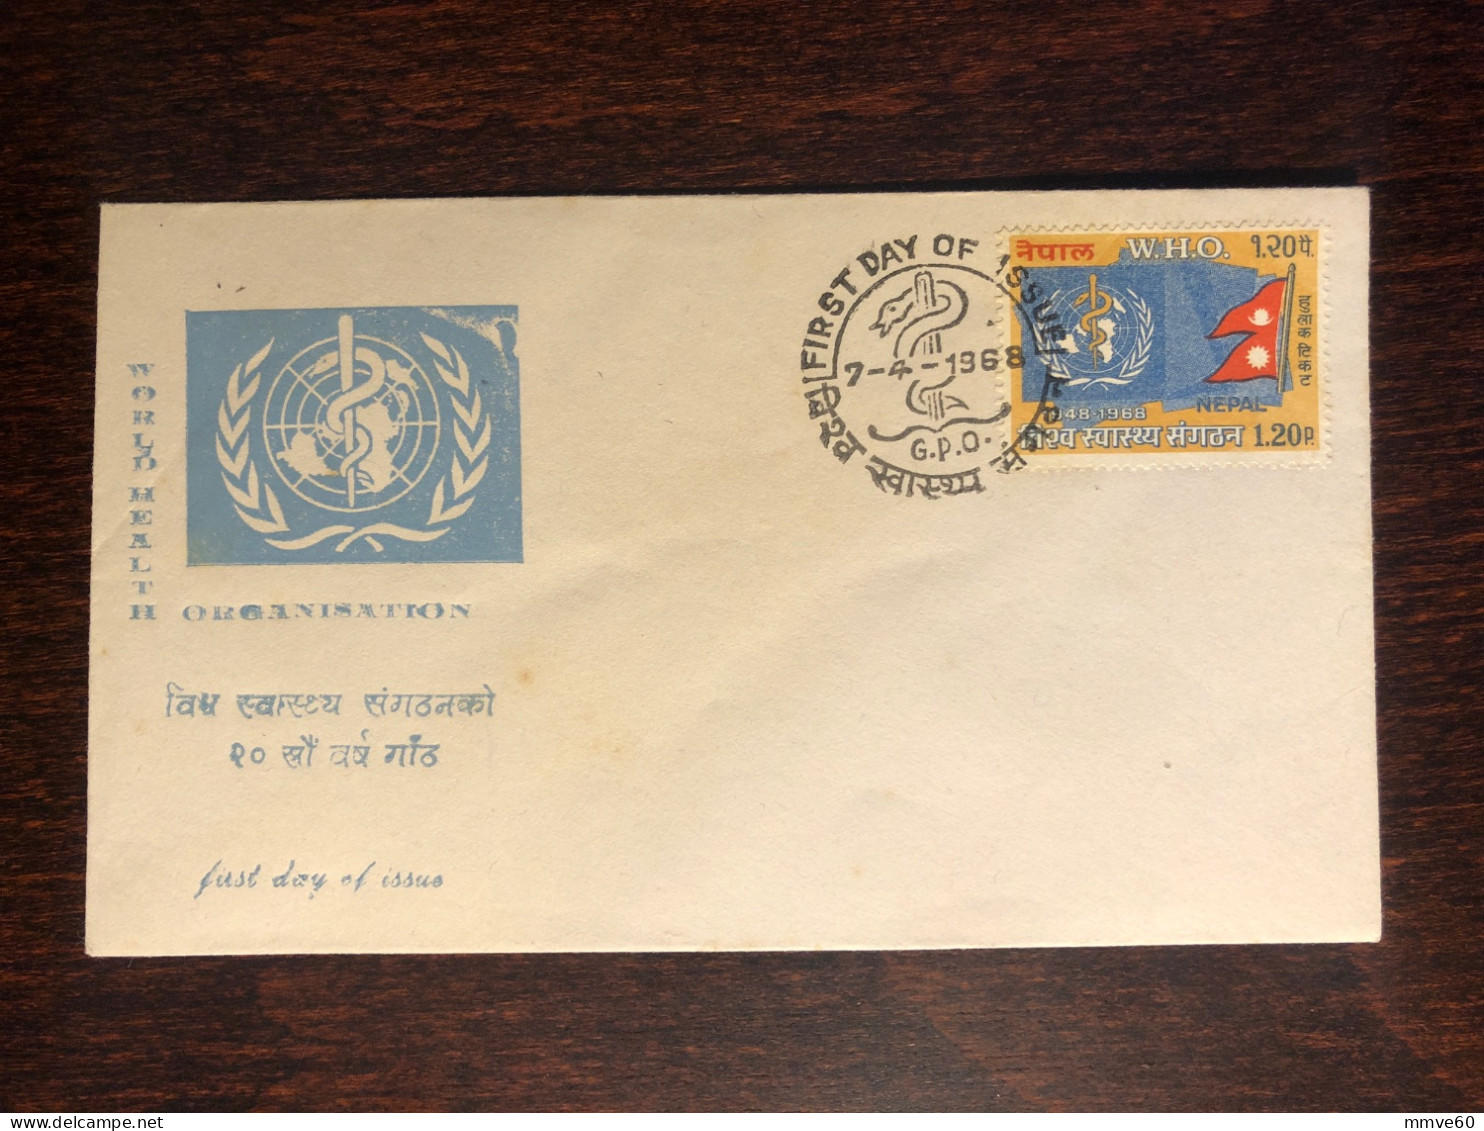 NEPAL FDC COVER 1968 YEAR WHO HEALTH MEDICINE STAMPS - Nepal